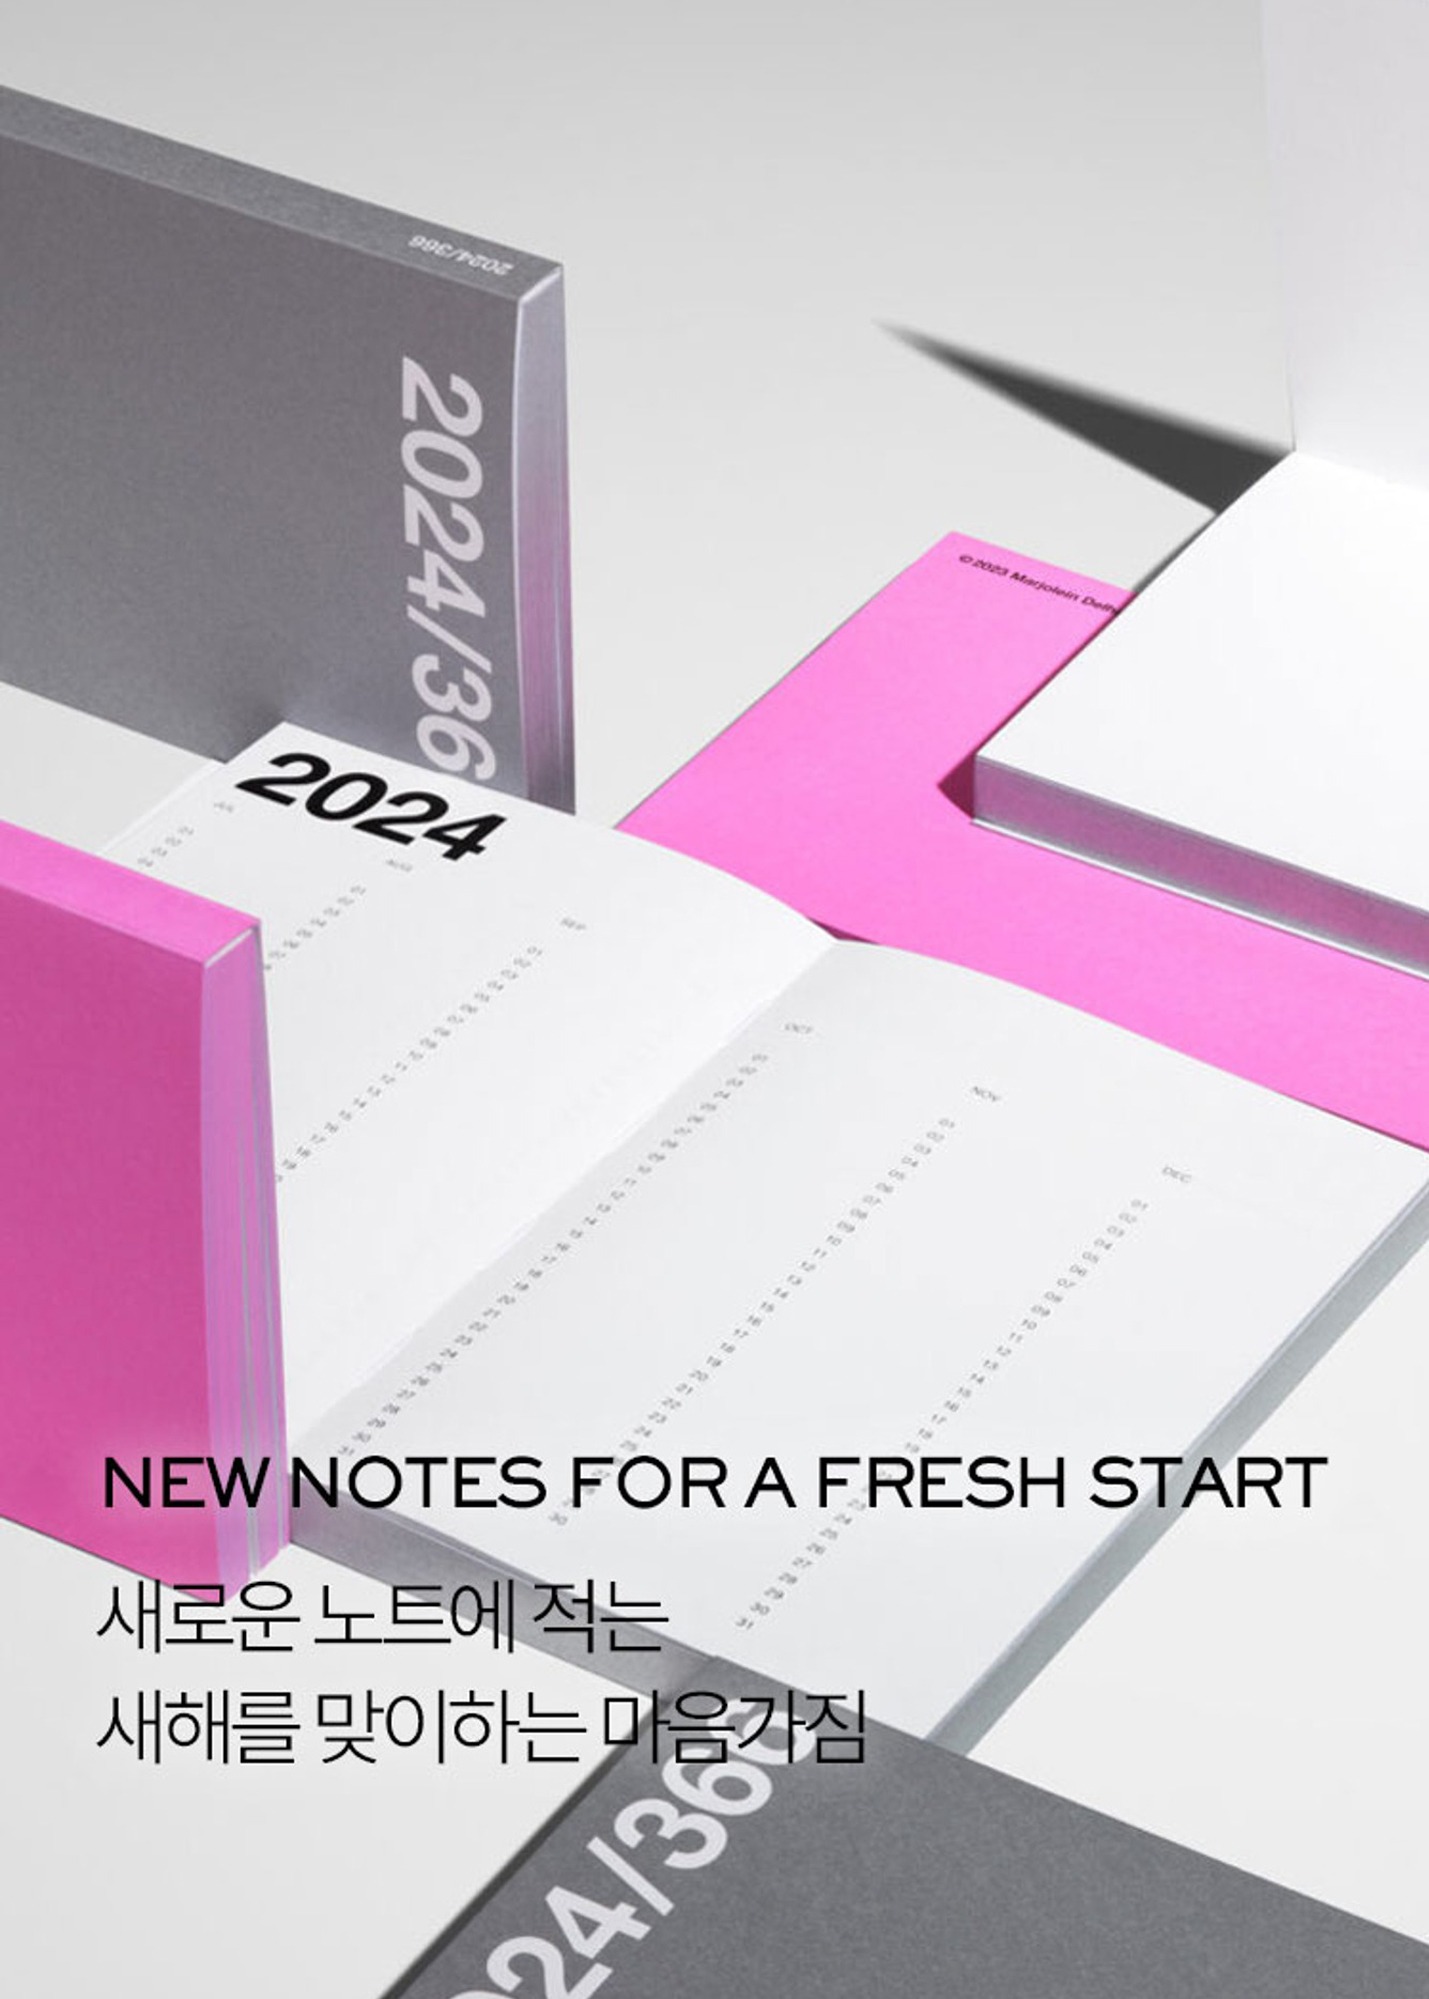 NEW NOTES FOR A FRESH START